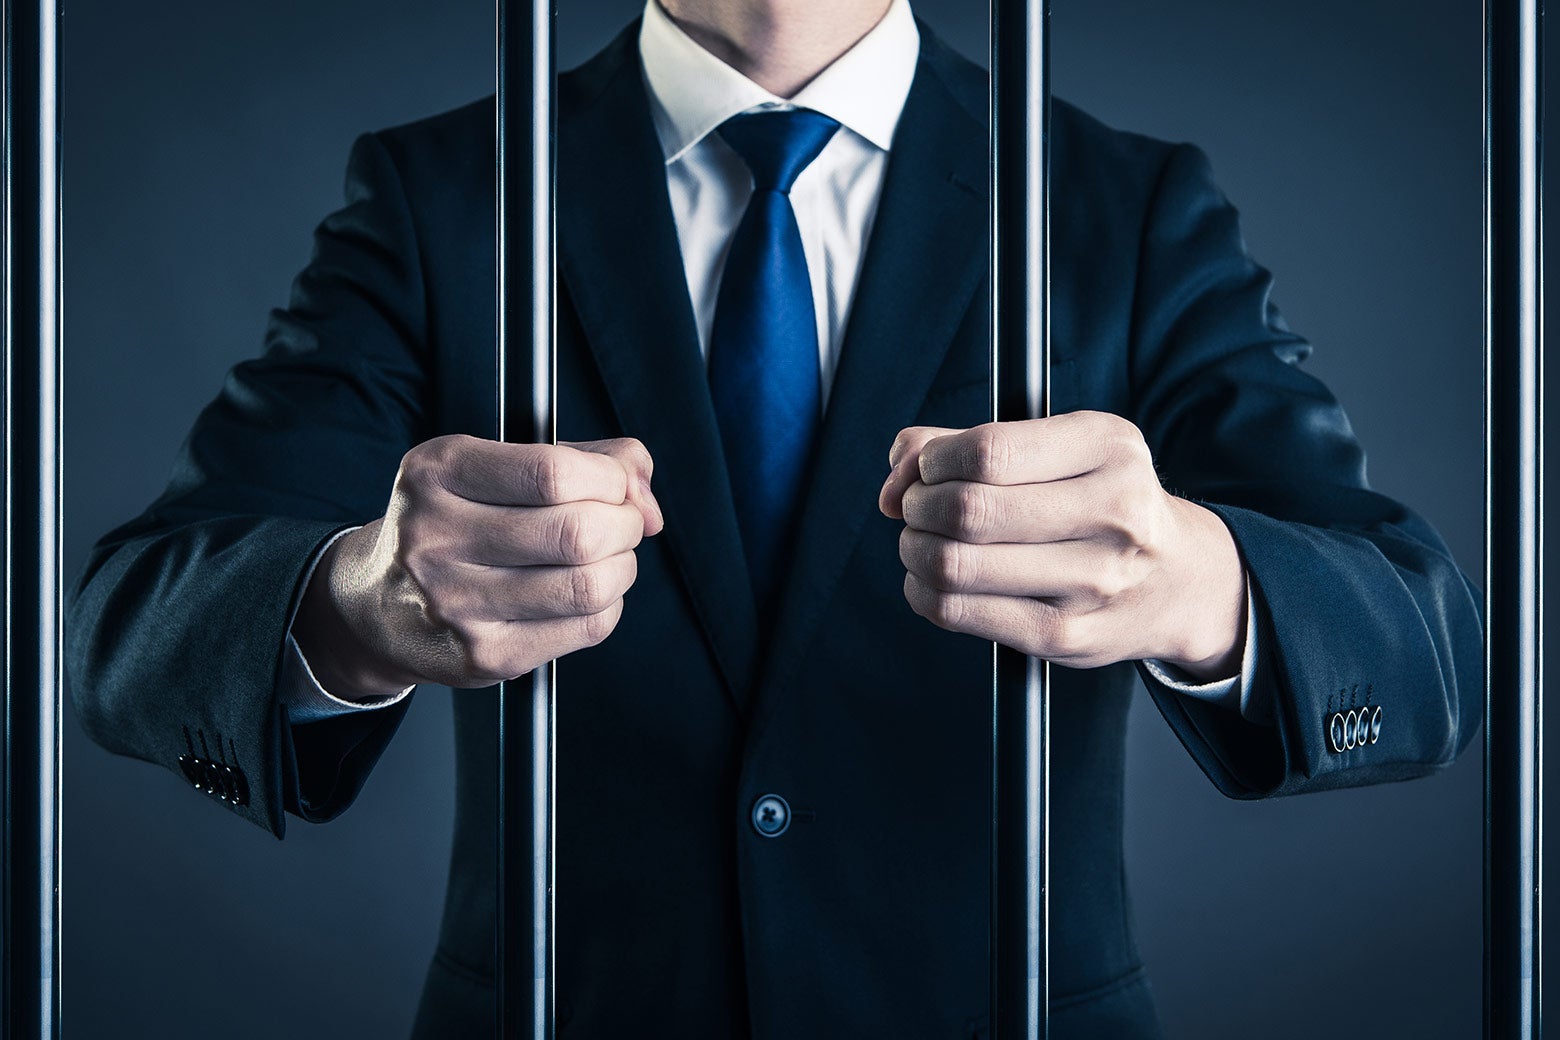 Suited executive behind bars